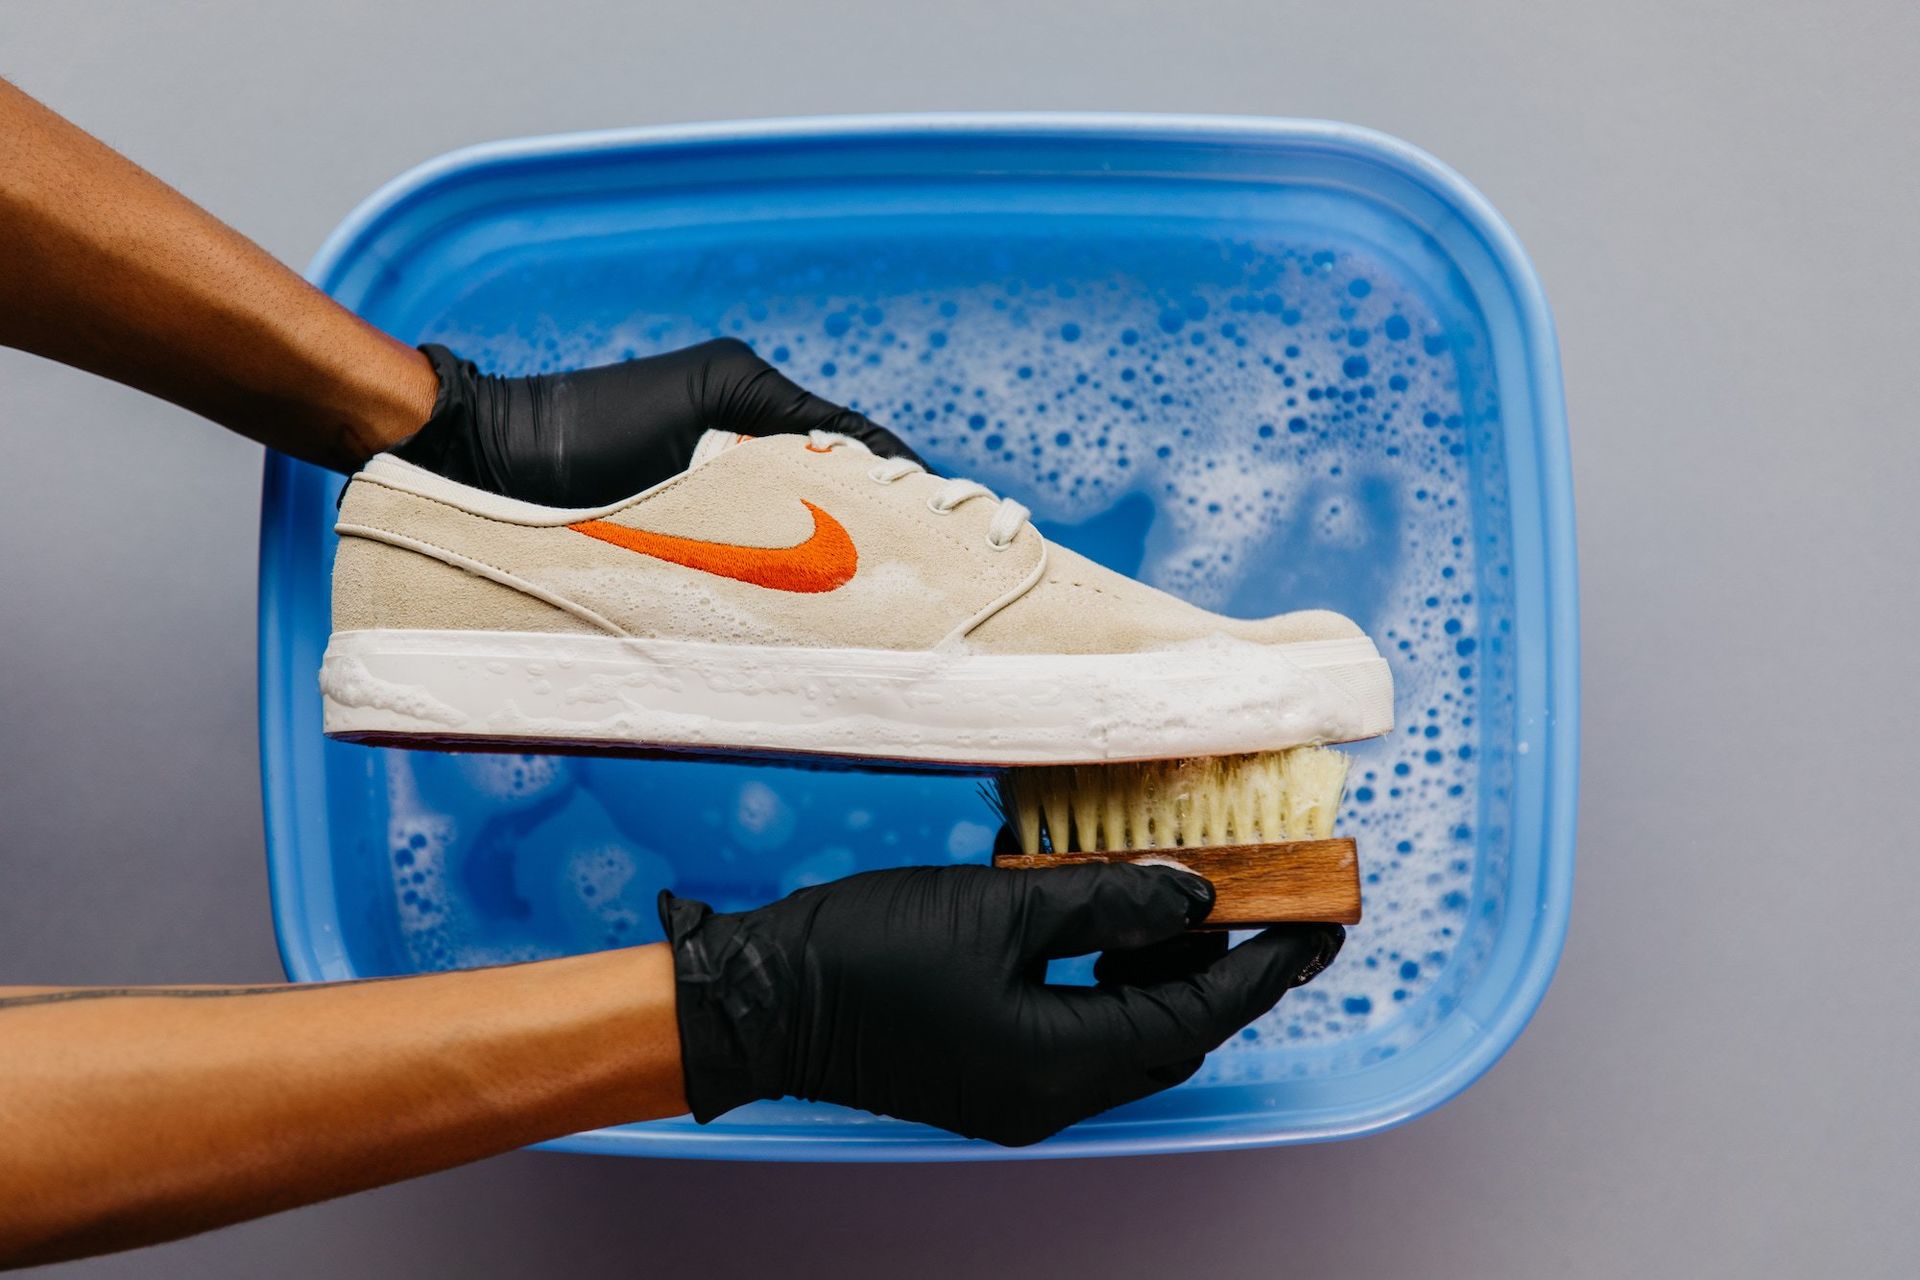 The best way to wash sports shoes